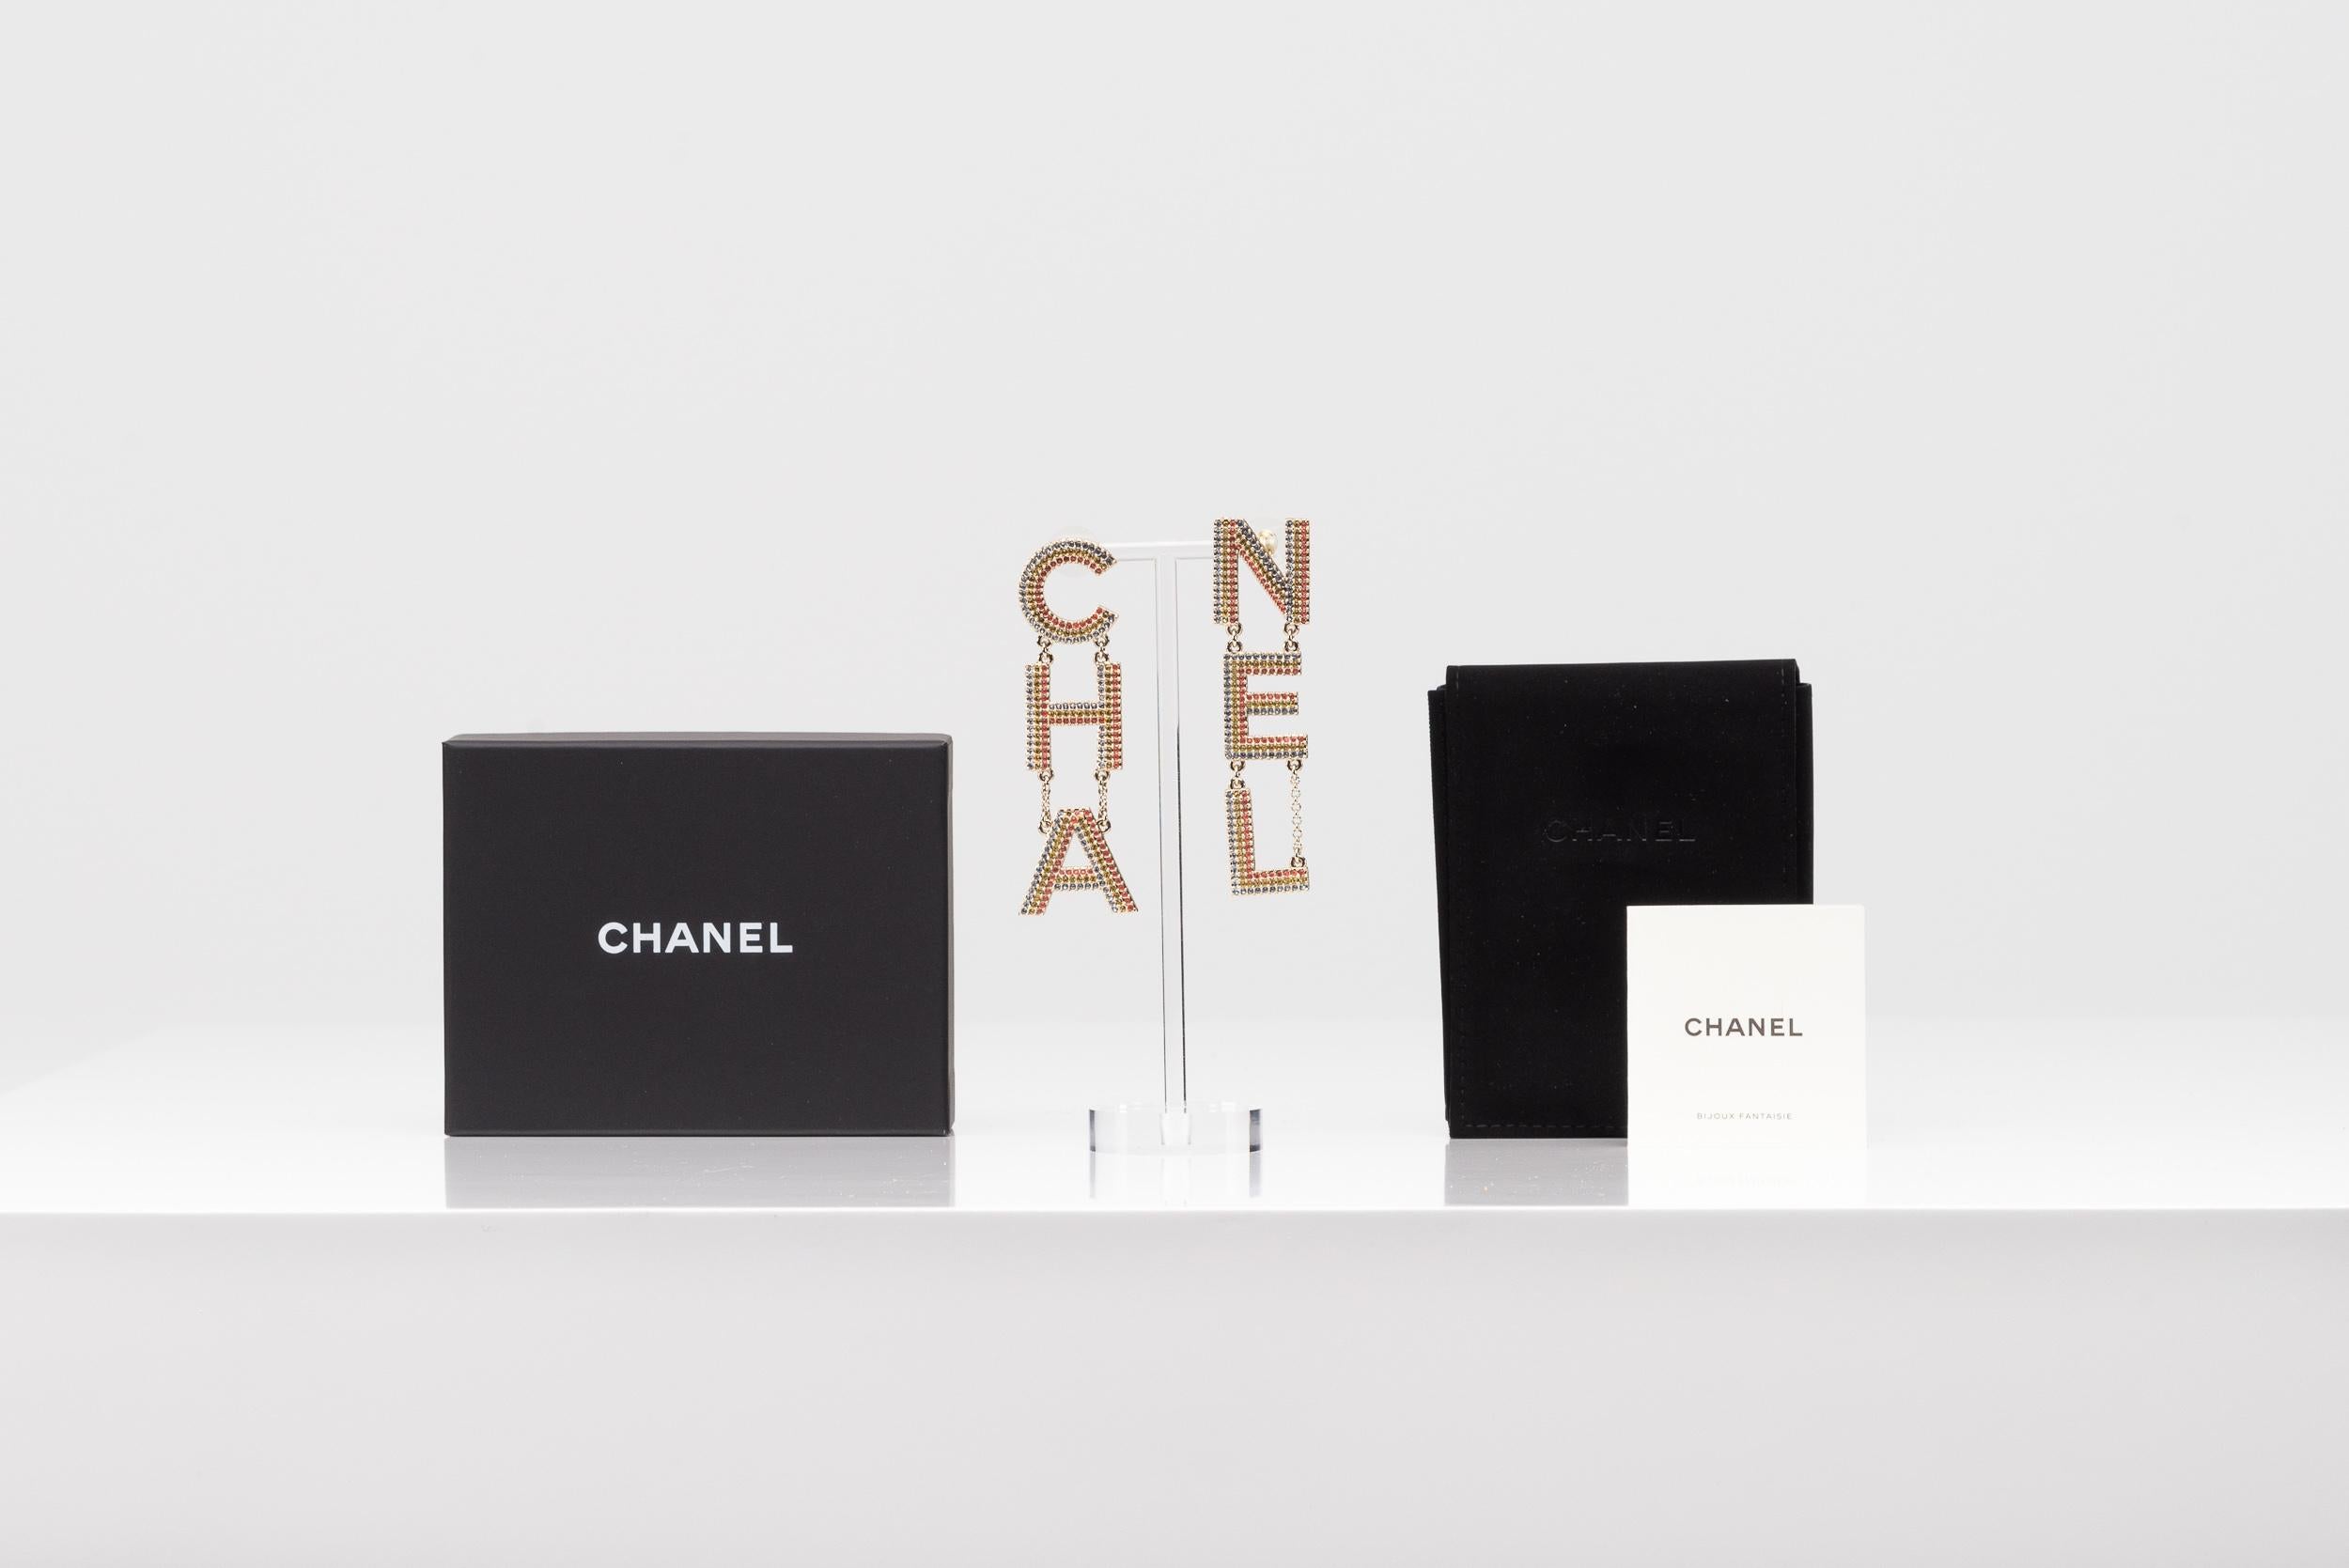 From the collection of SAVINETI we offer these Chanel Logo Earrings:
-	Brand: Chanel
-	Model: CHA NEL earrings rainbow
-	Year: 2023
-	Condition: New
-	Extras: comes with the original Chanel box & bag

These awesome Chanel earrings are from the 2023